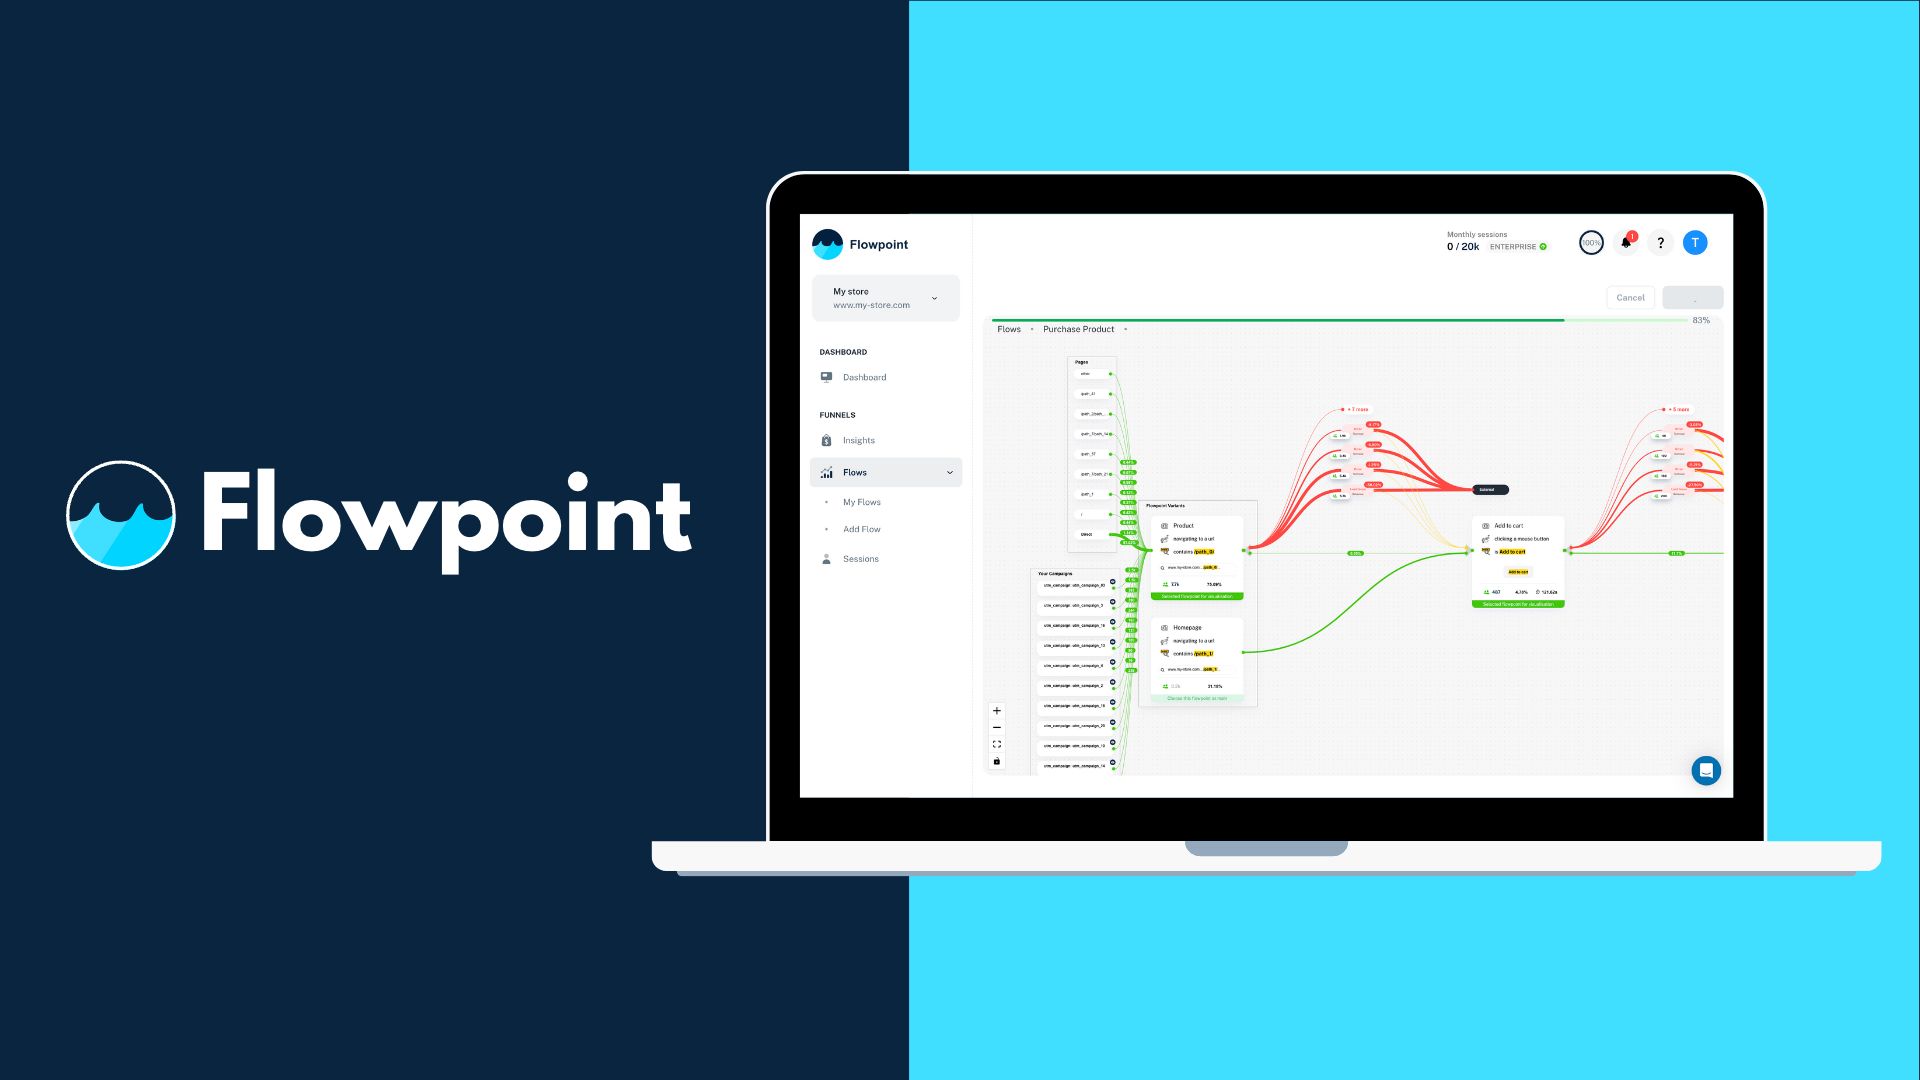 Flowpoint - A tool to optimize website conversions and improve ROI with data-driven decisions